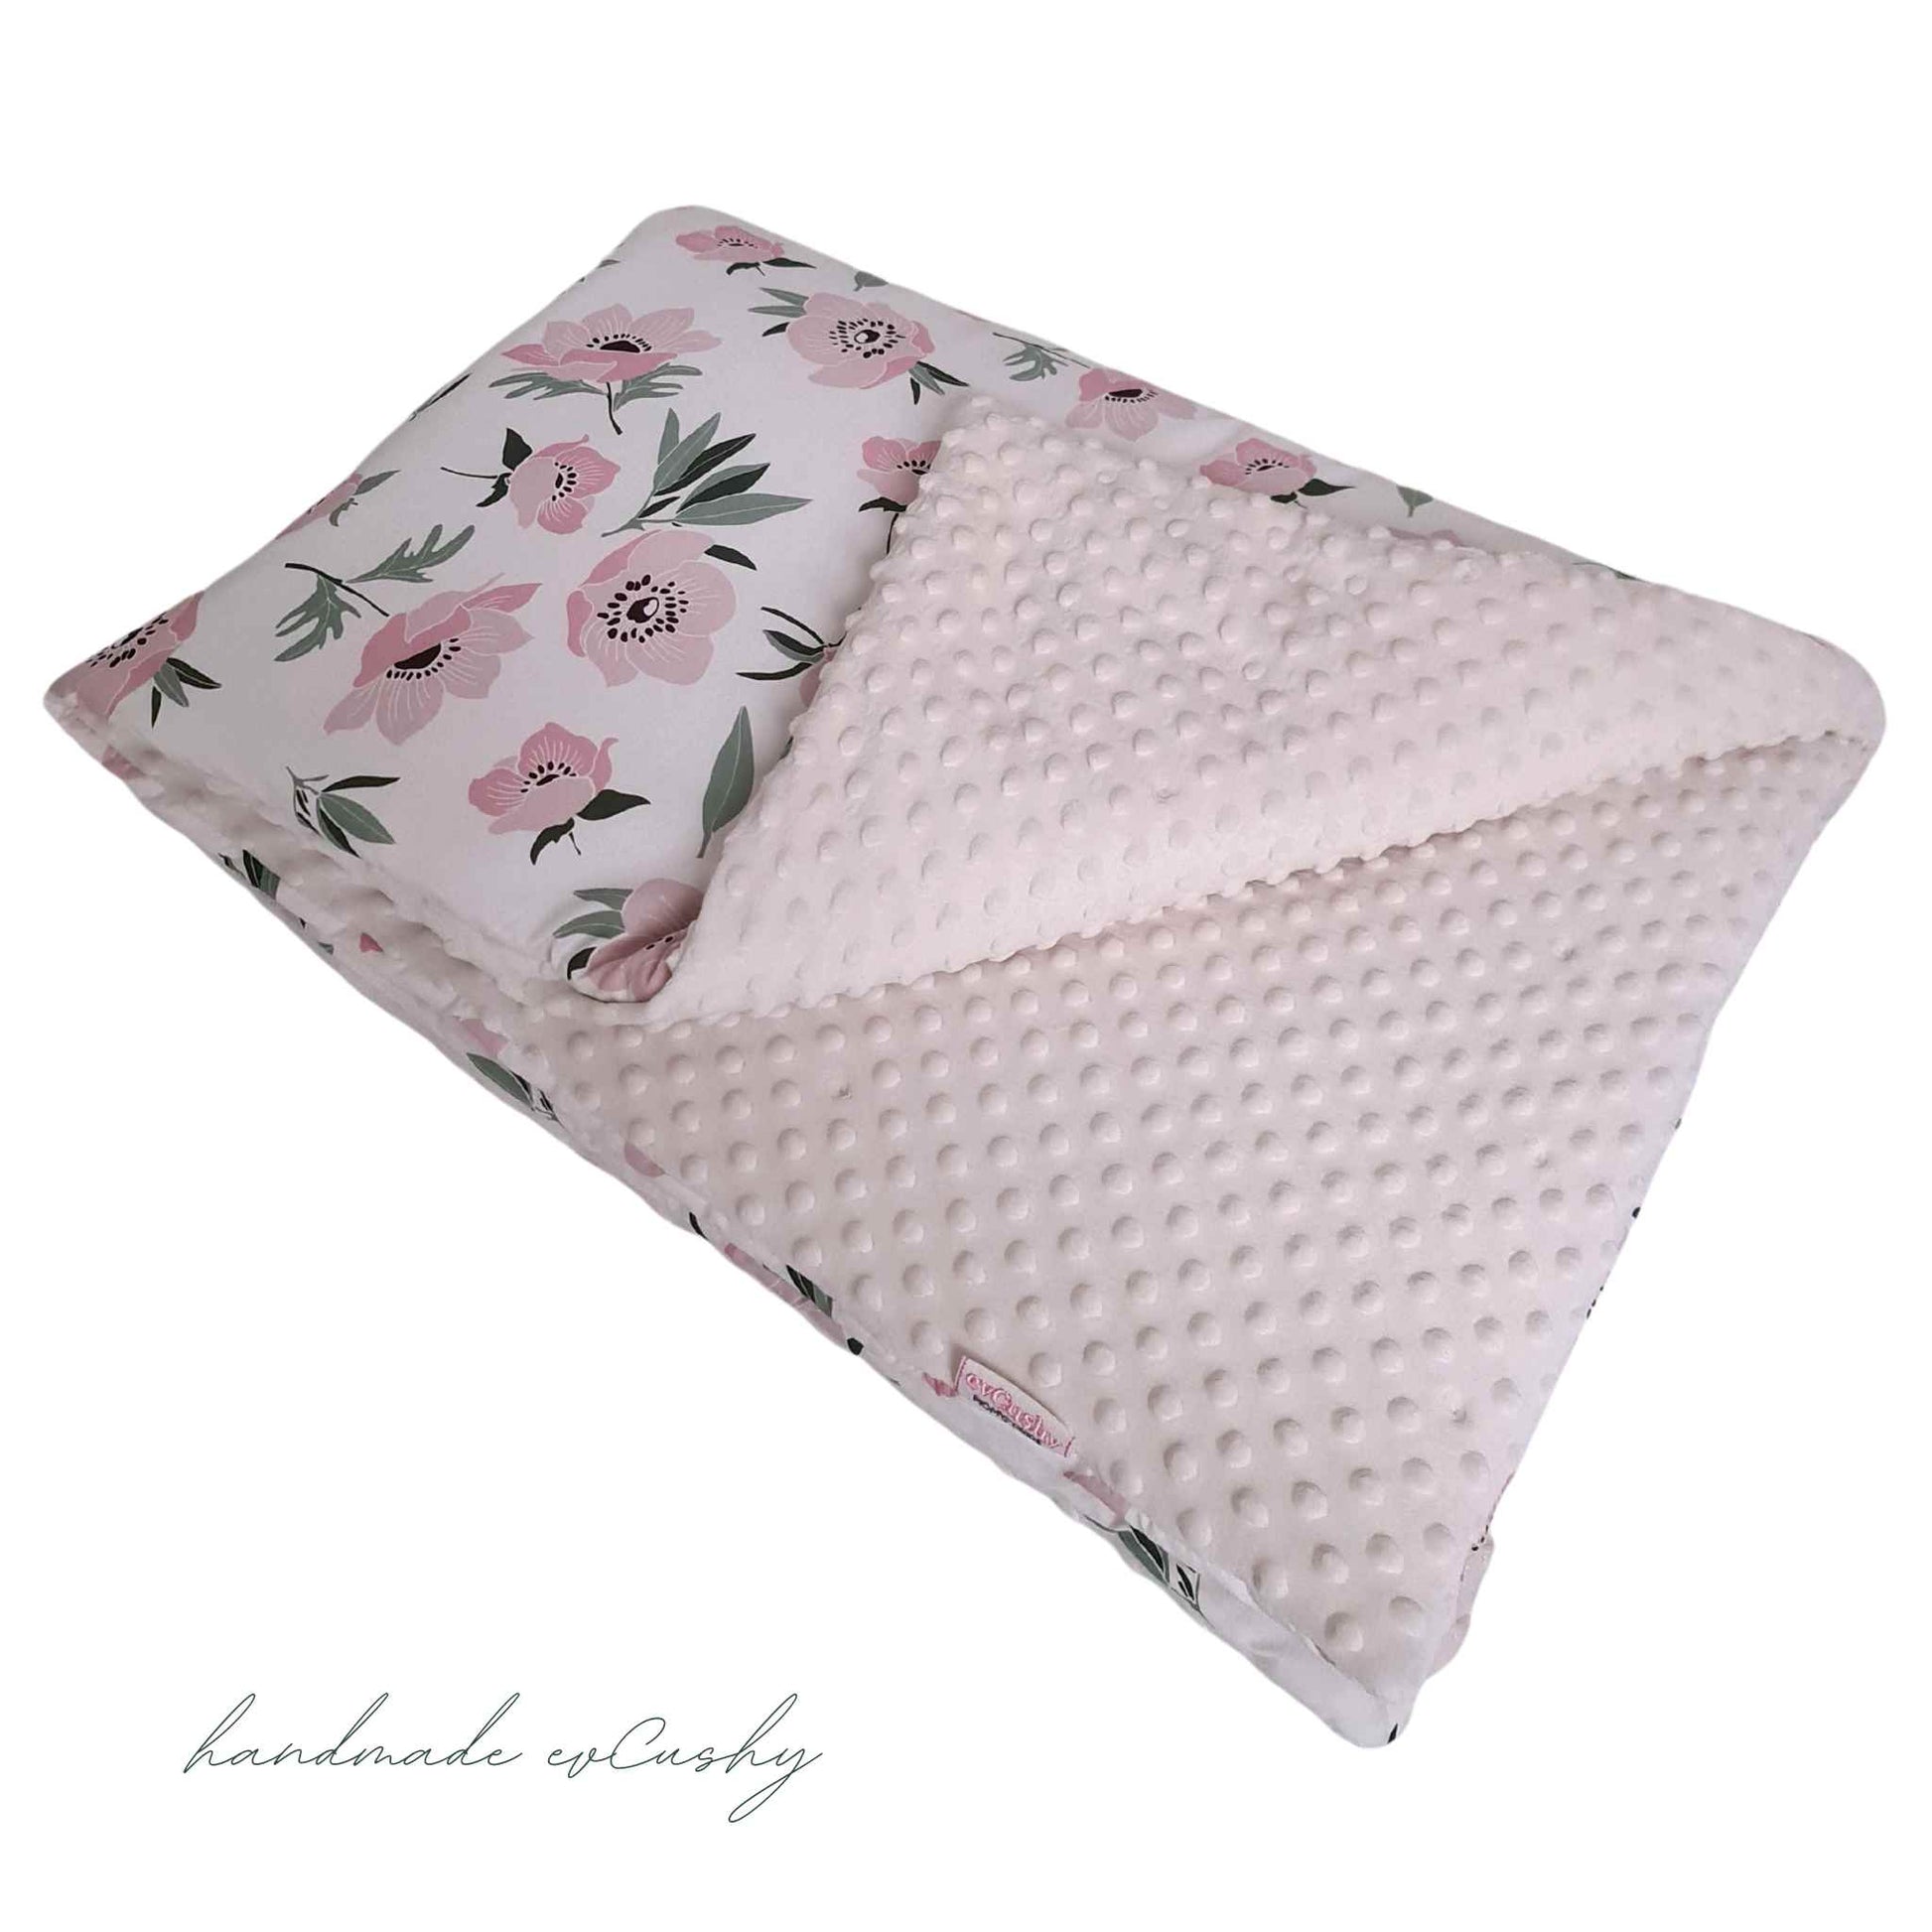 warm cosy blanket for baby and toddler cream fleece and floral pattern for cot bed